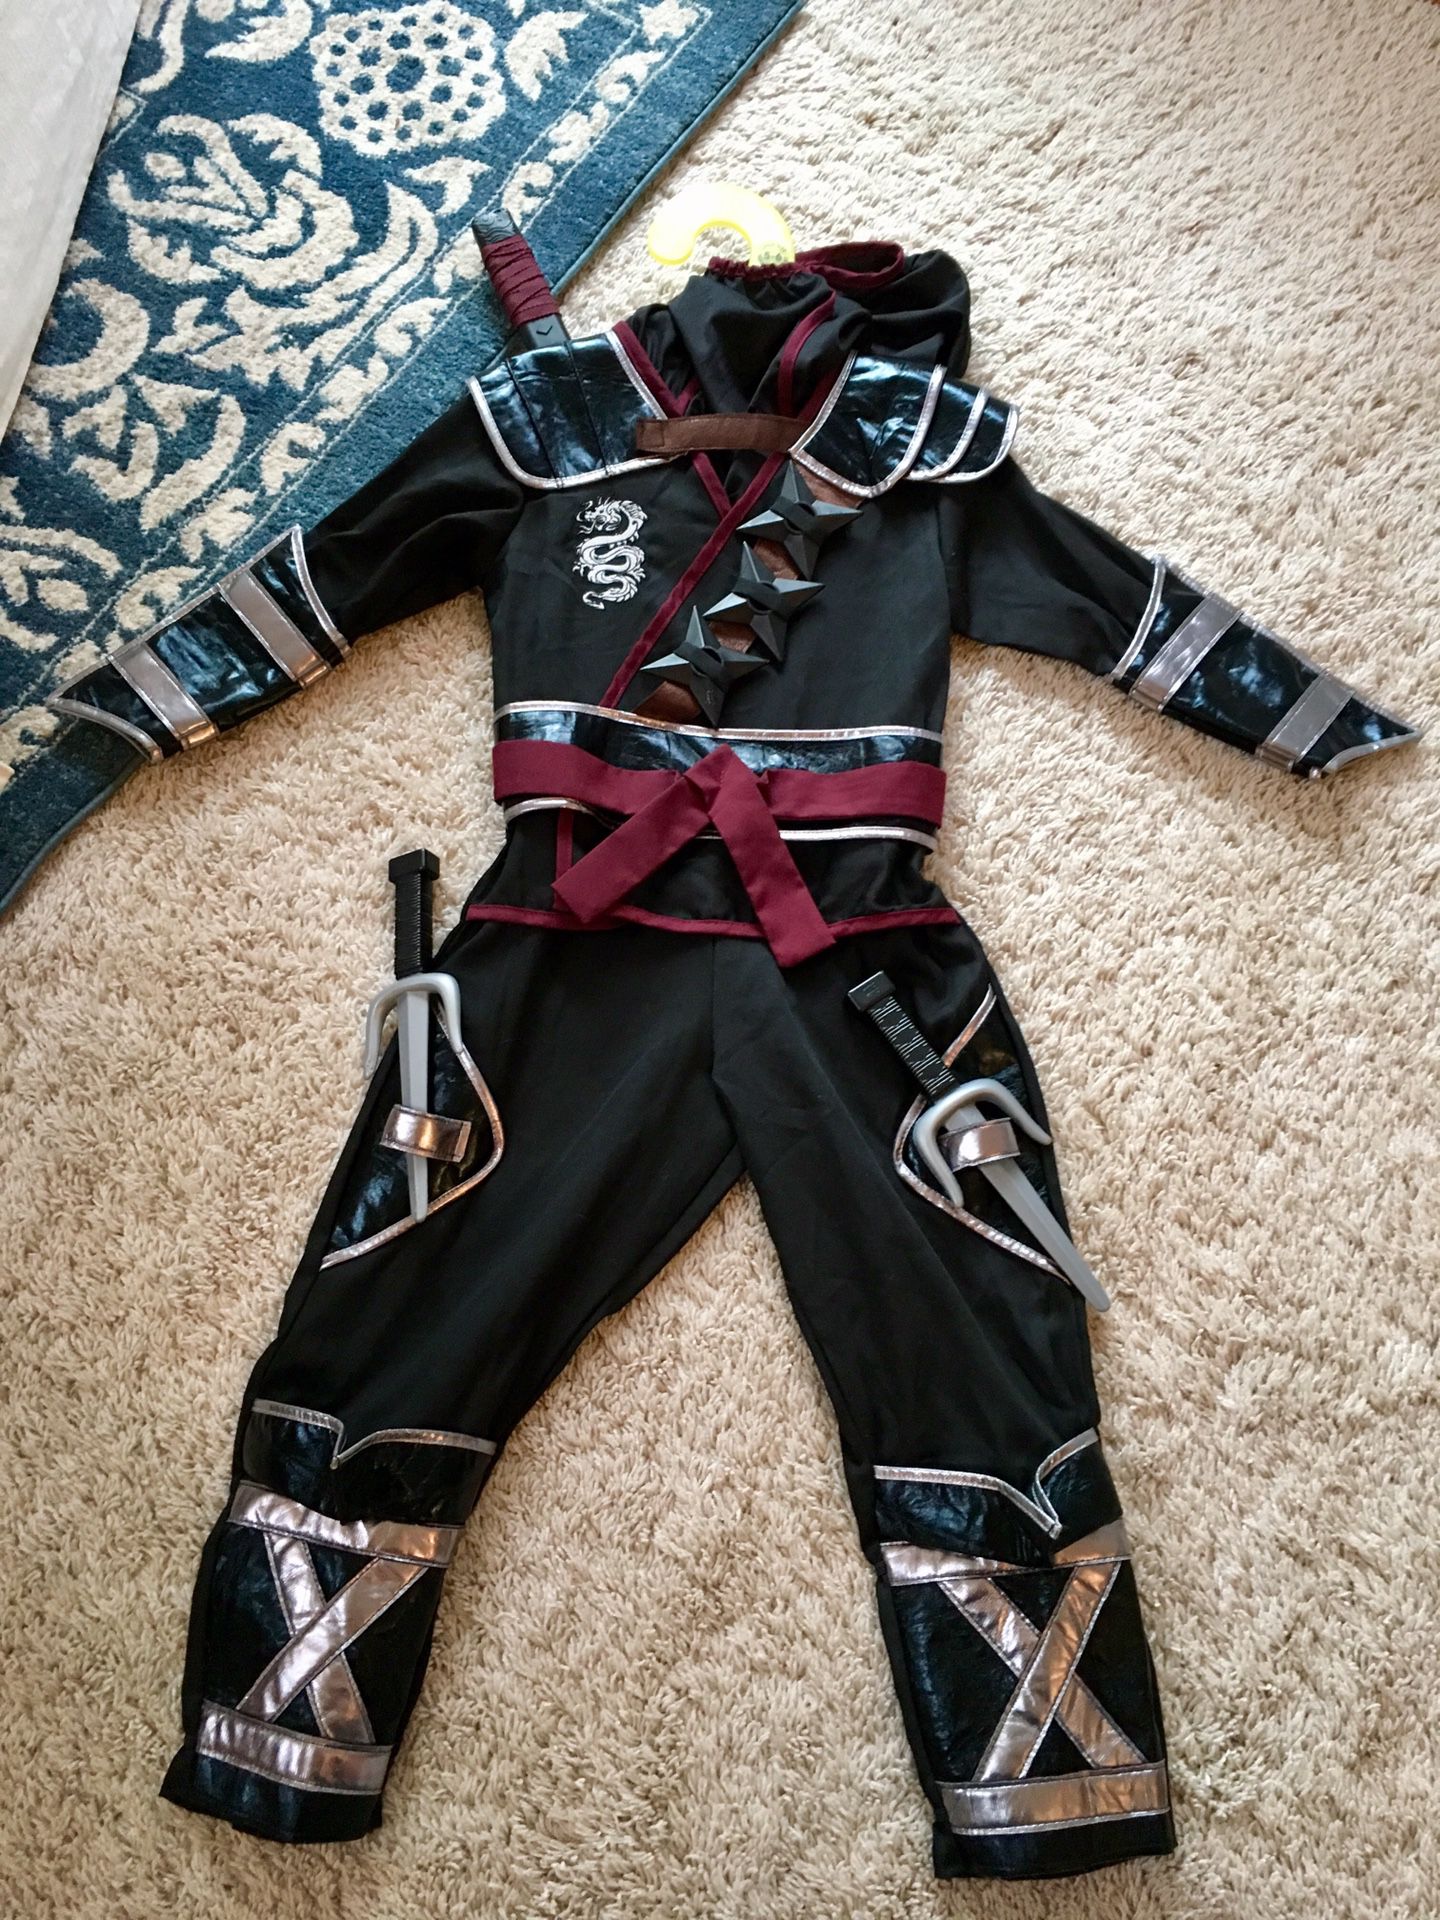 Size Small (5-6) Ninja costume in Excellent Condition